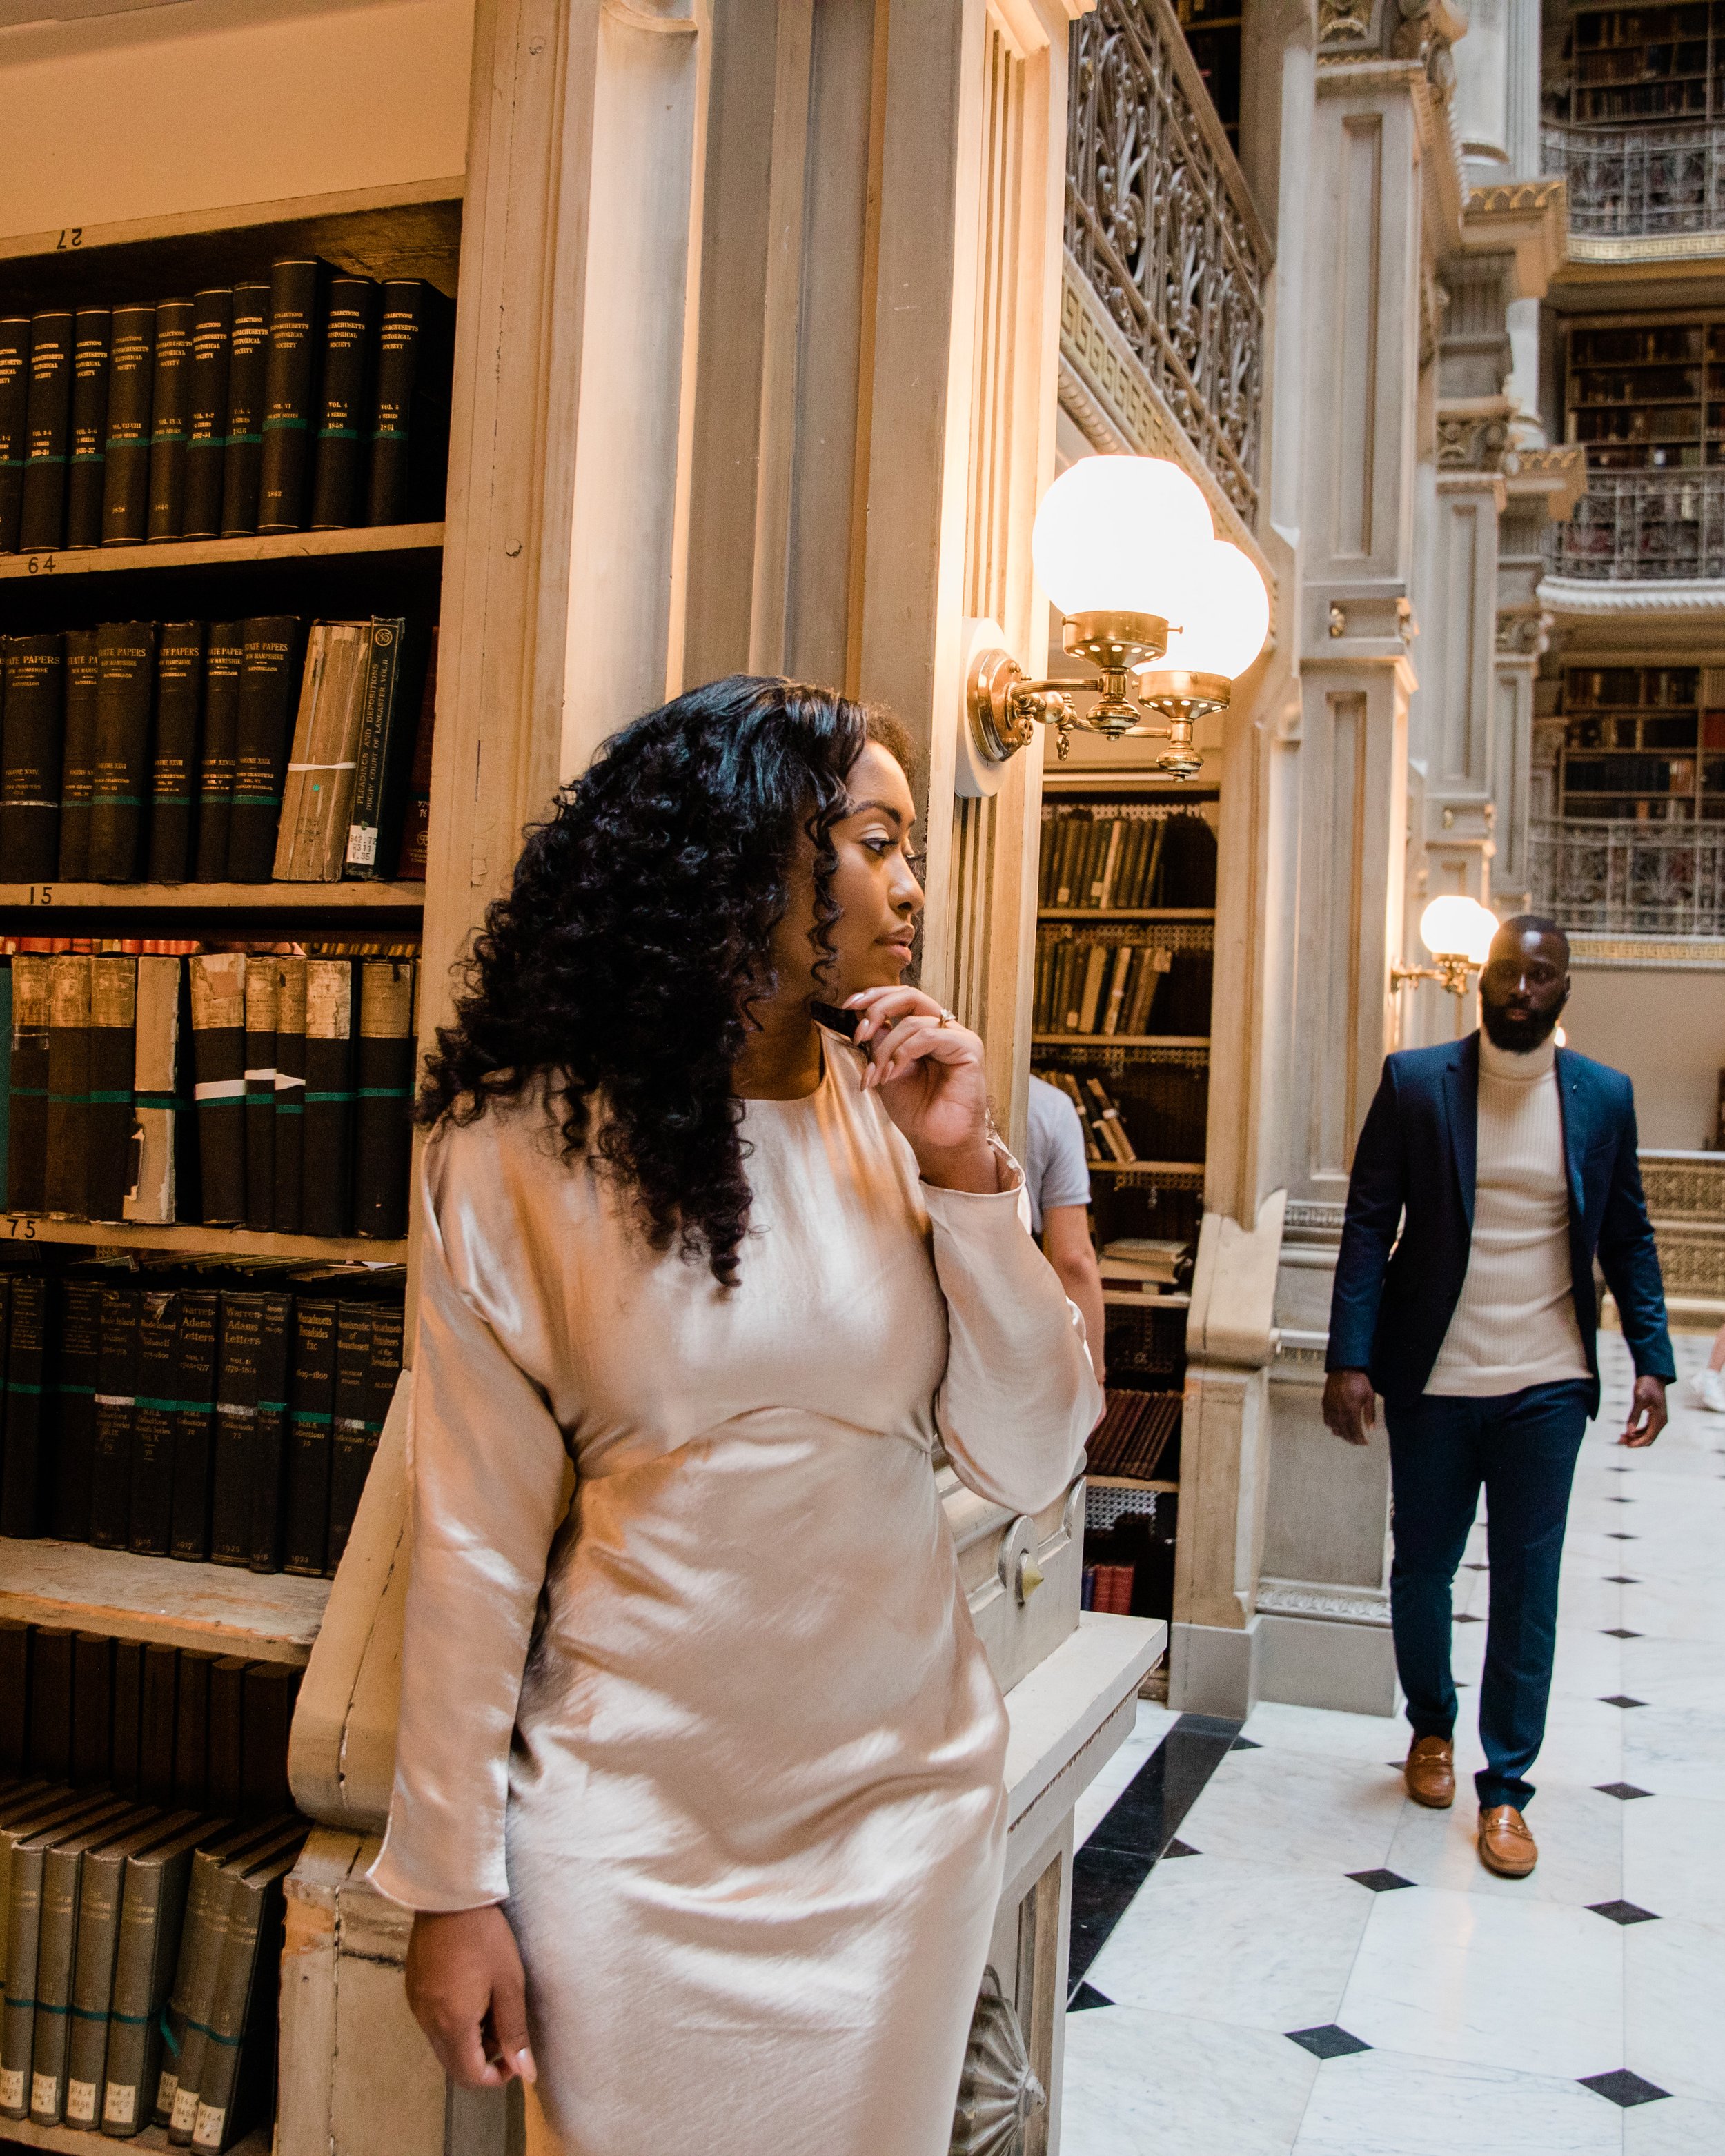 Disney Beauty and The Beast Inspired Engagement Session at The Peabody Library Baltimore Maryland shot by Megapixels Media Photography-25.jpg